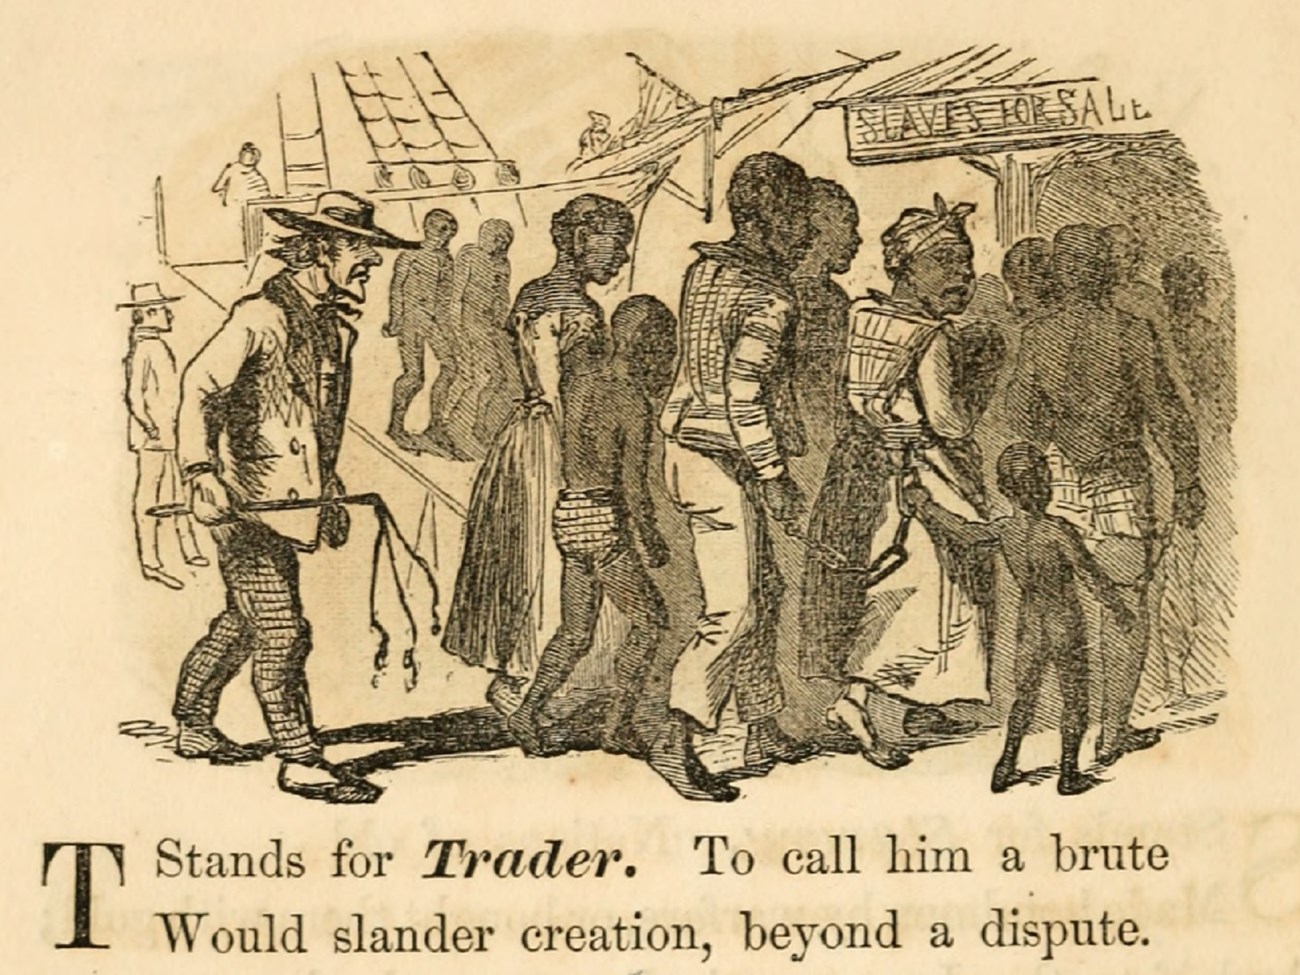 The text reads “T stands for Trader. To call him a brute would slander creation, beyond a dispute.” Above this a white, well dressed man carrying a whip is forcing a chained group of enslaved people of various ages into an auction house